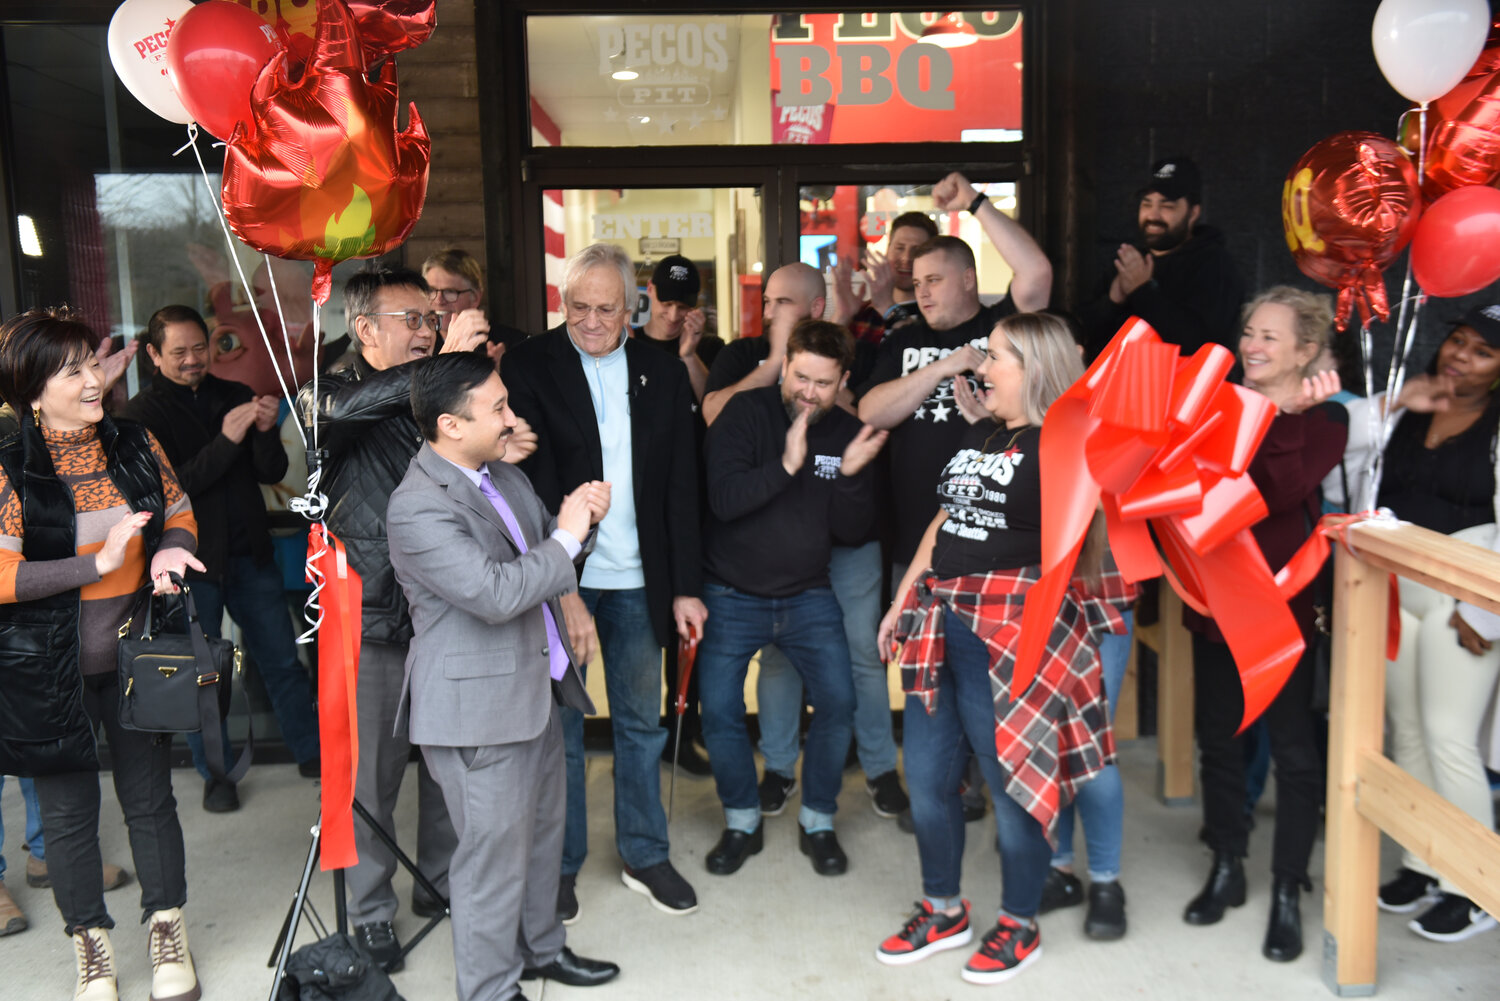 Attendants at Pecos Pit Bar-B-Que's grand opening in Yelm, including Mayor Joe DePinto and owner Gerry Kingen, smile and applaud after the ribbon was officially cut at the resturaunt on Friday, Jan. 26.